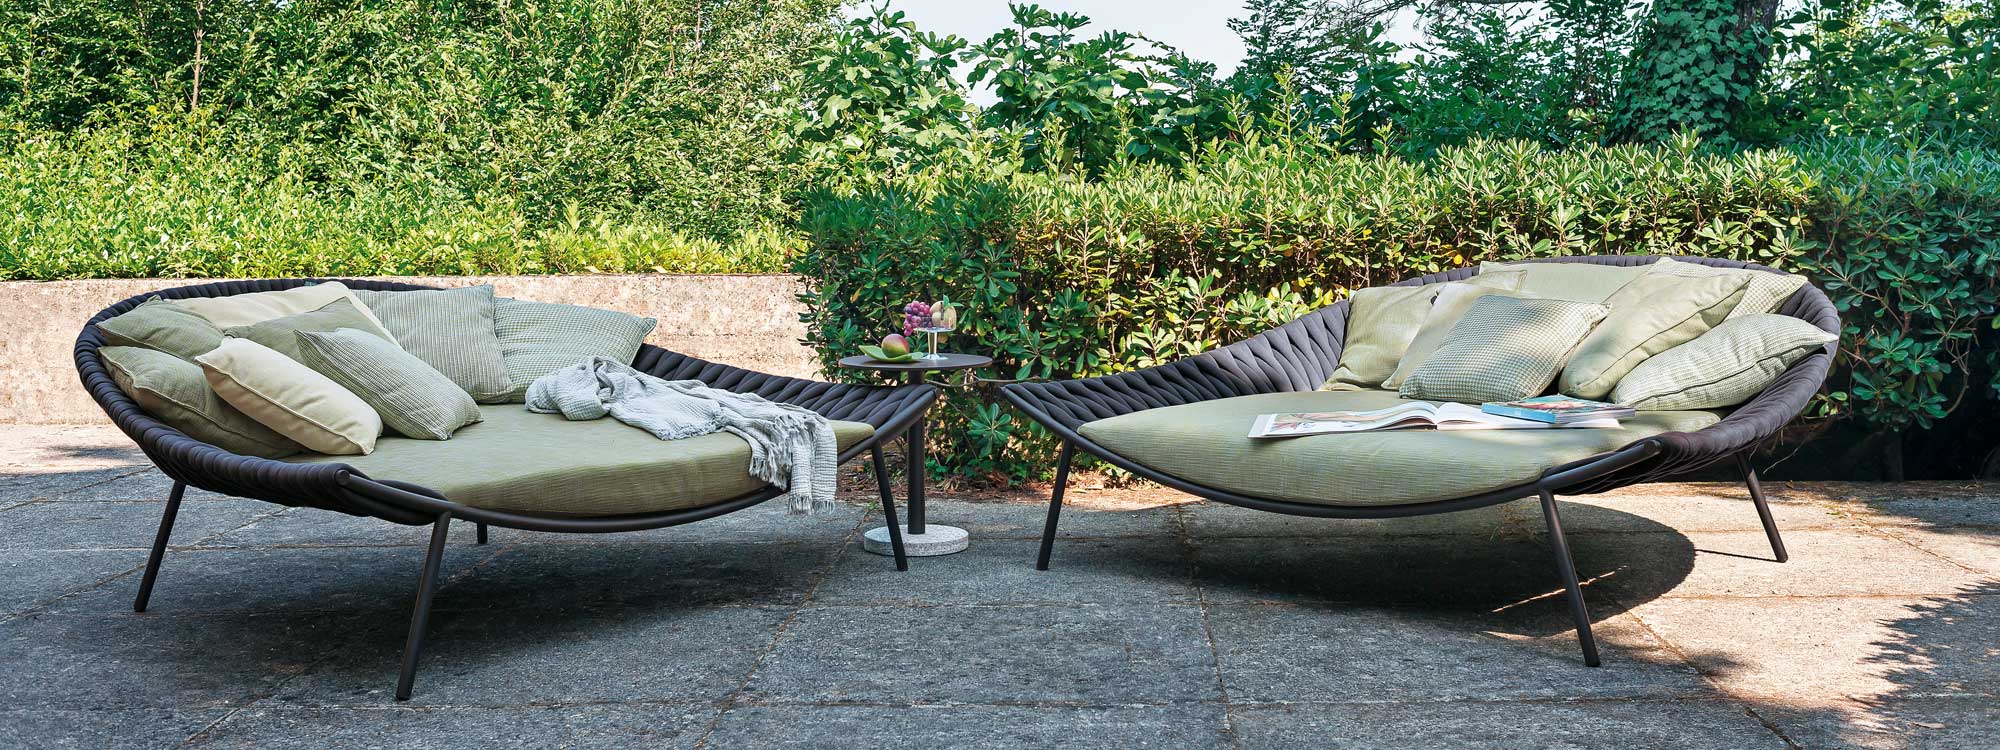 Image of pair of Arena minimalist garden daybeds by RODA, shown side to side on terrace, with Bernardo circular side table in the center